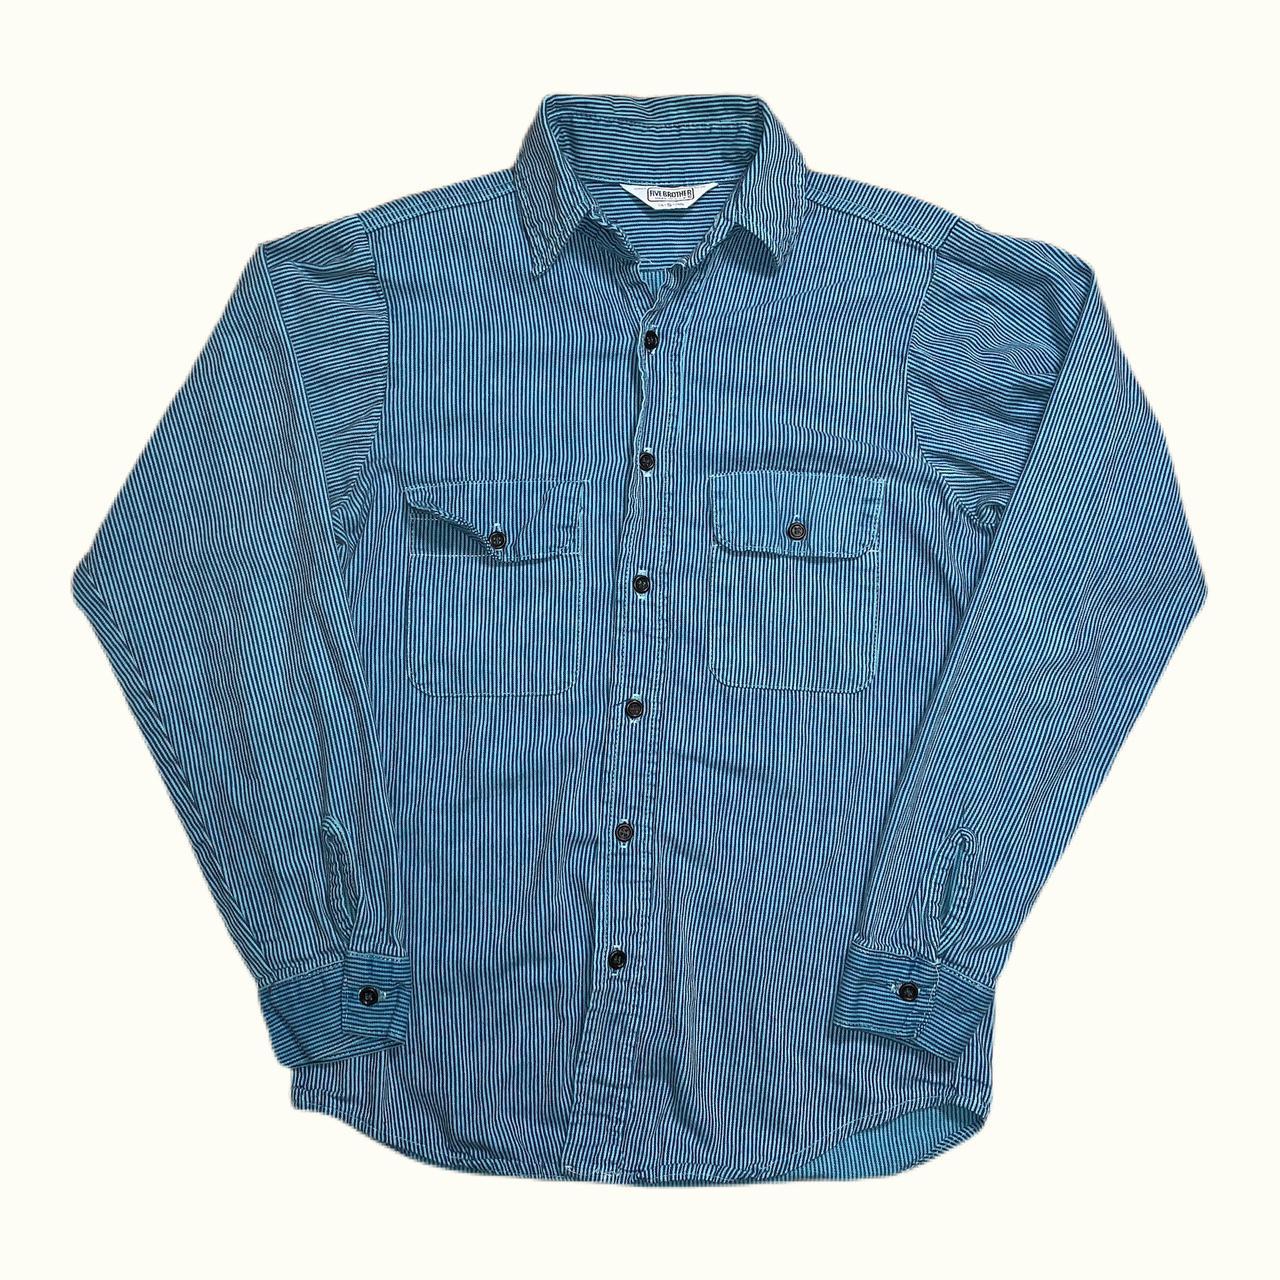 Product Image 1 - Vintage blue striped flannel shirt

Nice